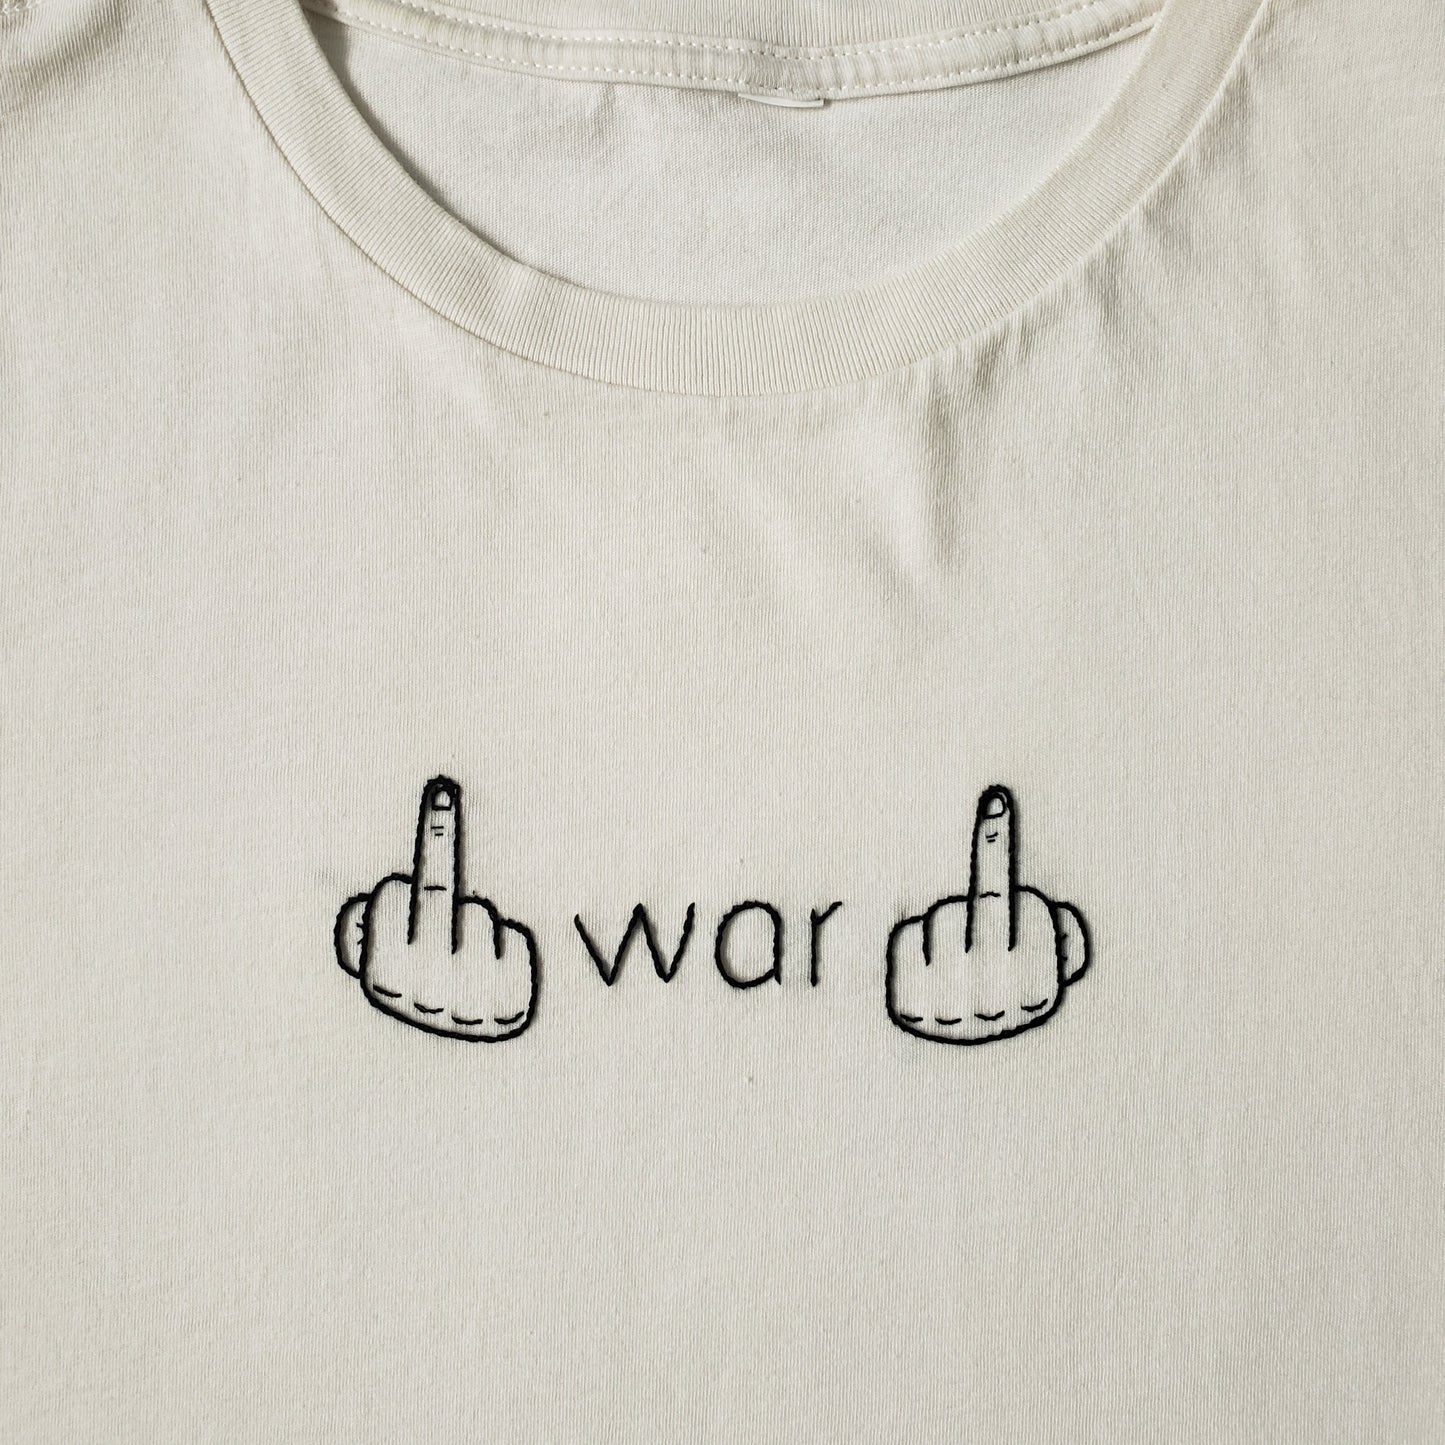 A close up of an off white crew neck tee with war and two hands flipping the bird hand embroidered in black thread. It is all done in a vine stitch. The text is in a font similar to Helvetica and the hands are slightly brutalist in style. We can see that the stitching is even and the hands have detail on the knuckles. 